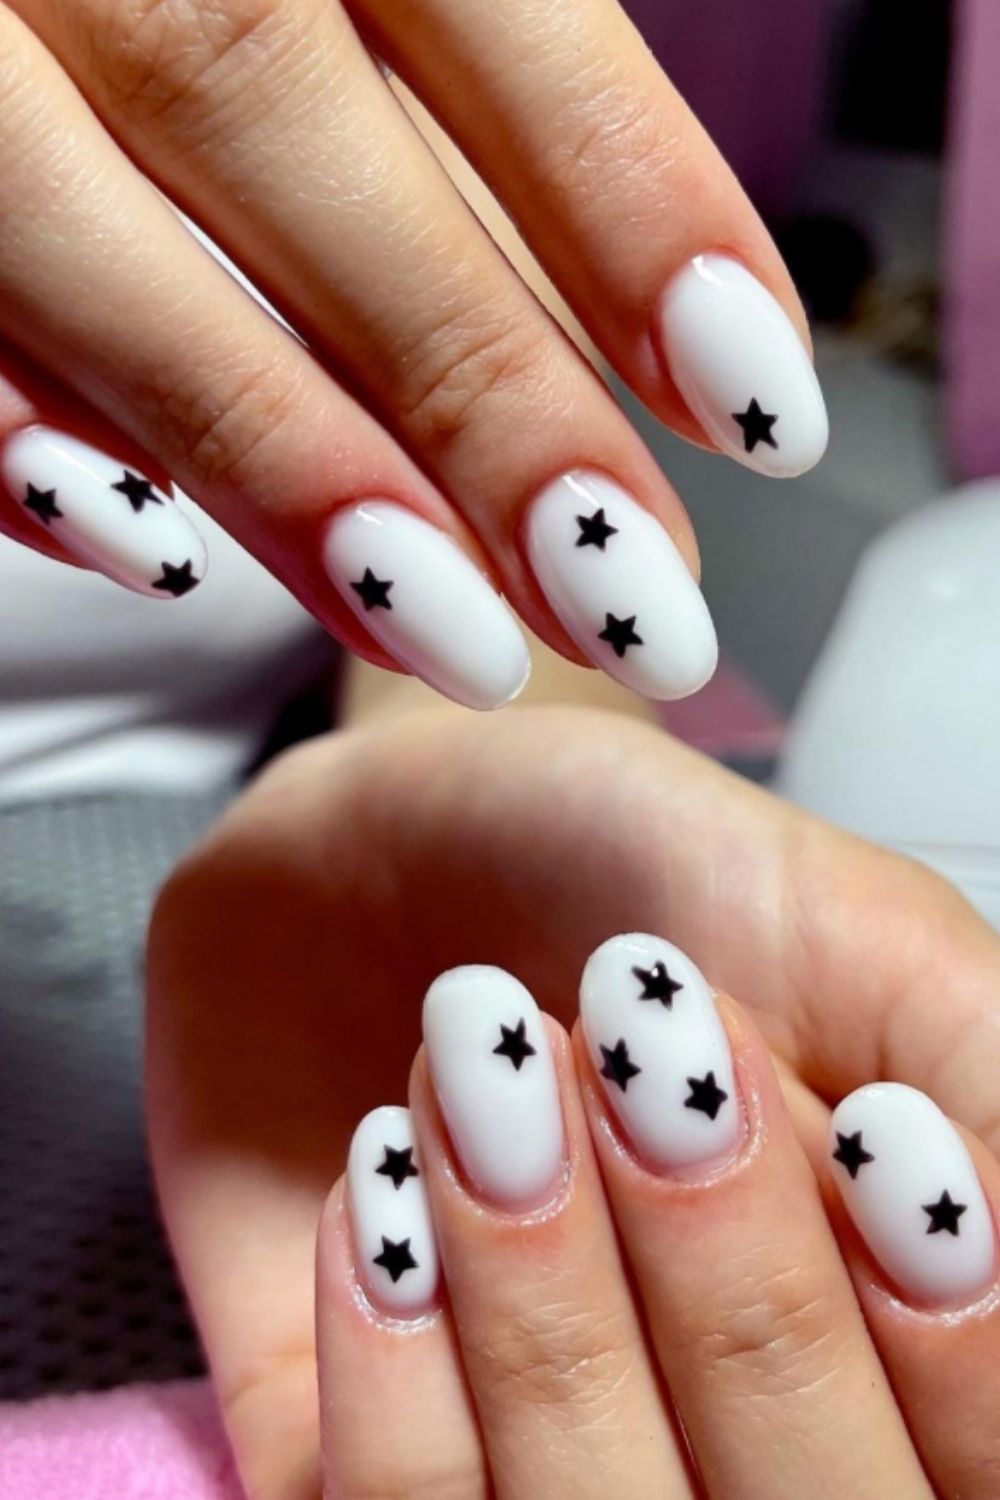 White oval nails with stars